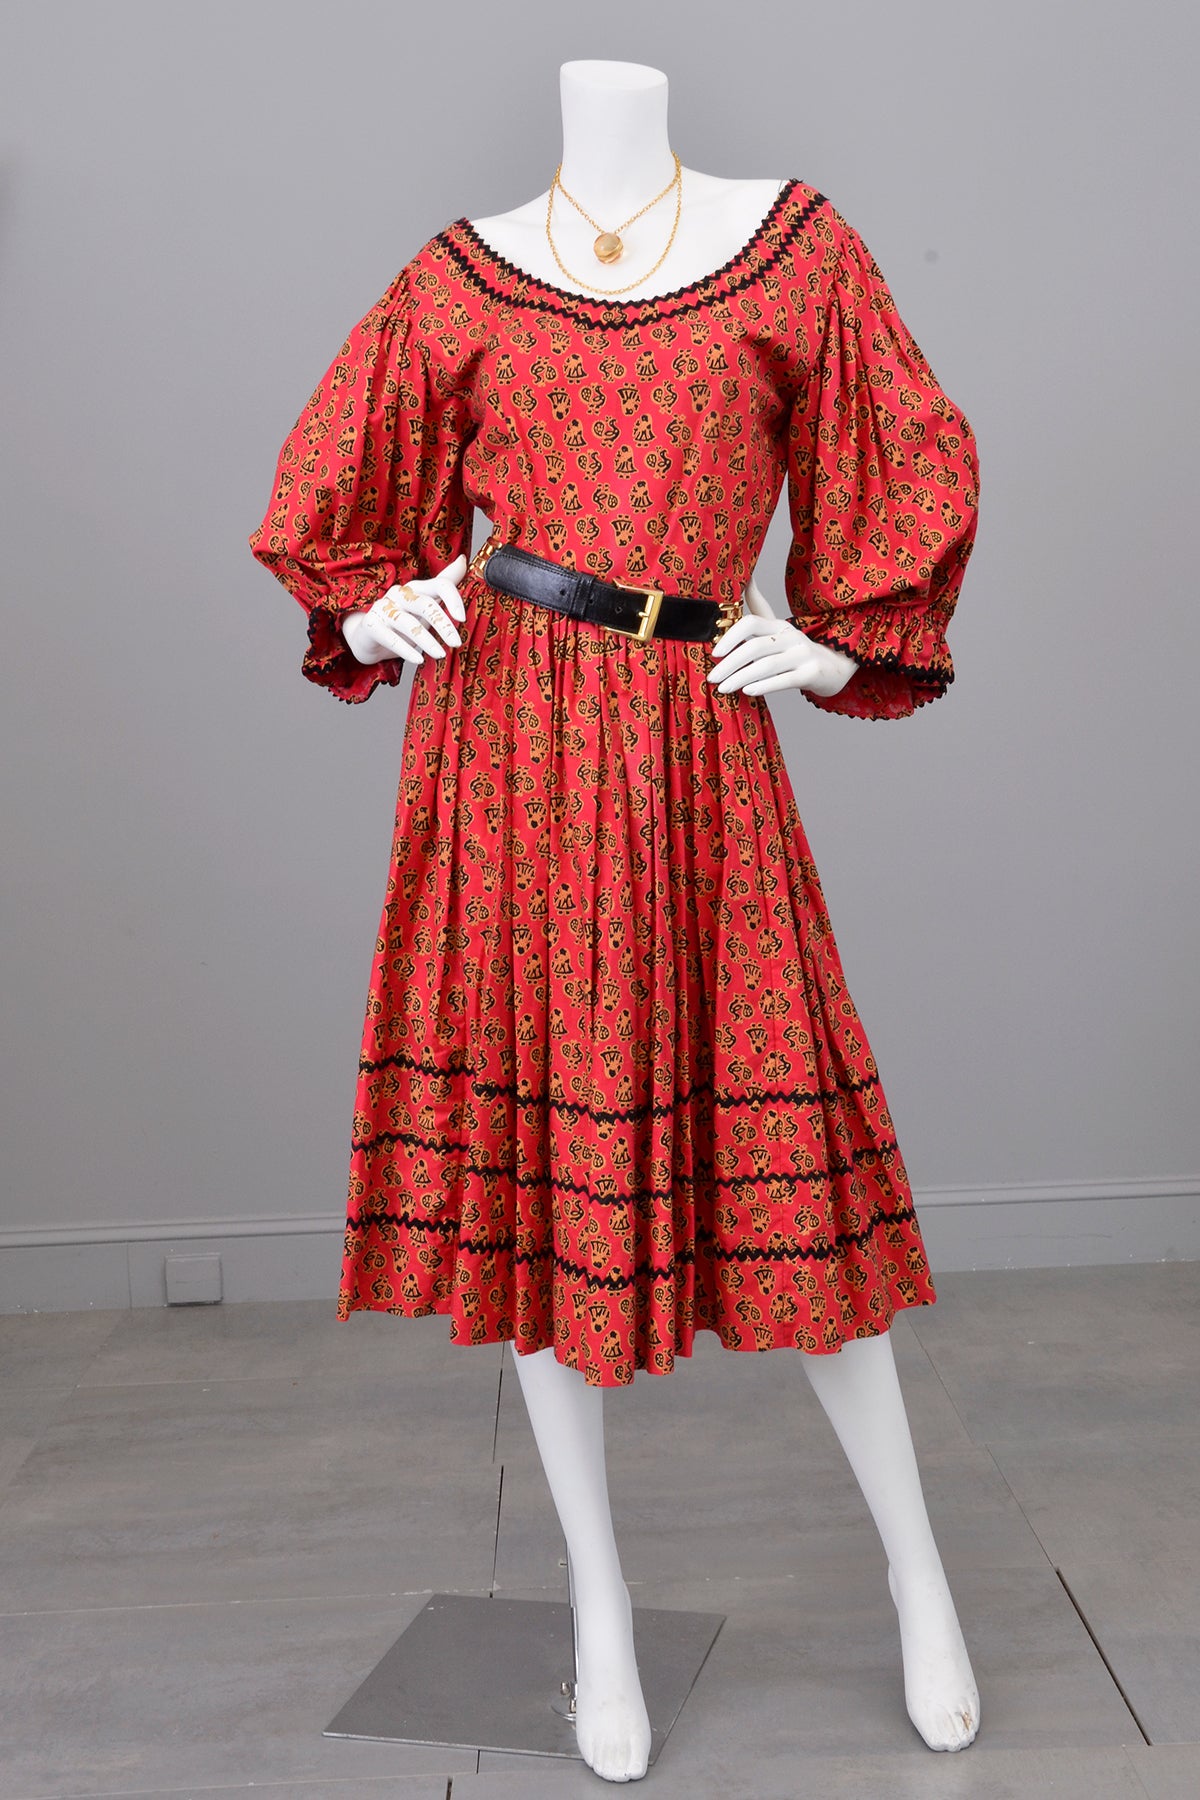 1950s Folklore Peasant Dress with Huge Poet Sleeves and Figural